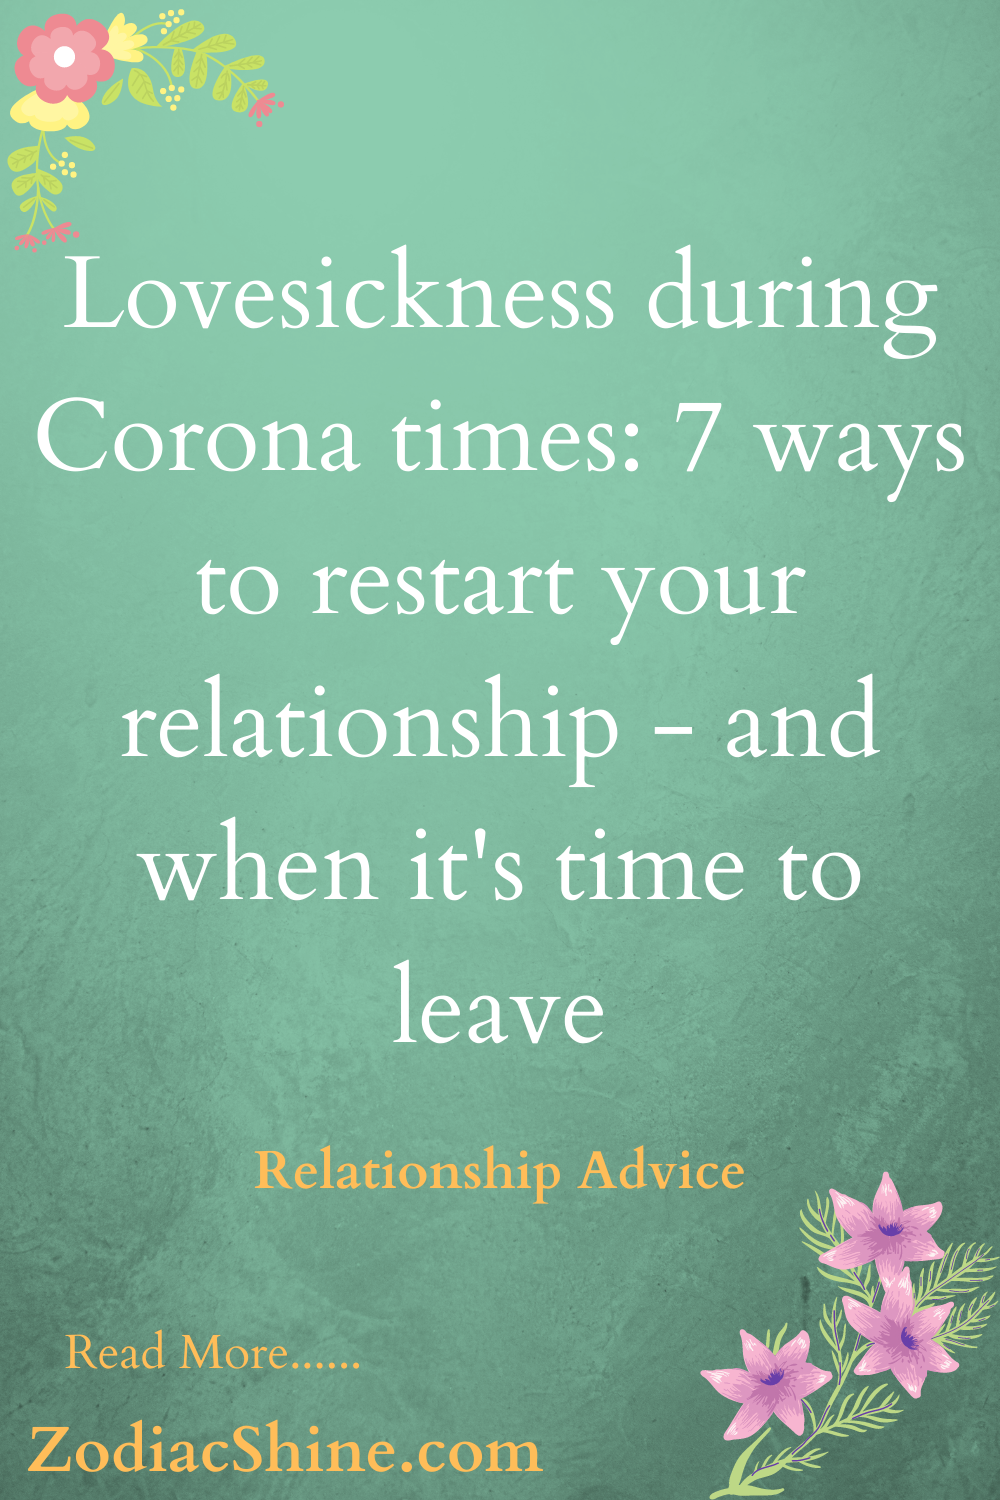 Lovesickness during Corona times: 7 ways to restart your relationship - and when it's time to leave